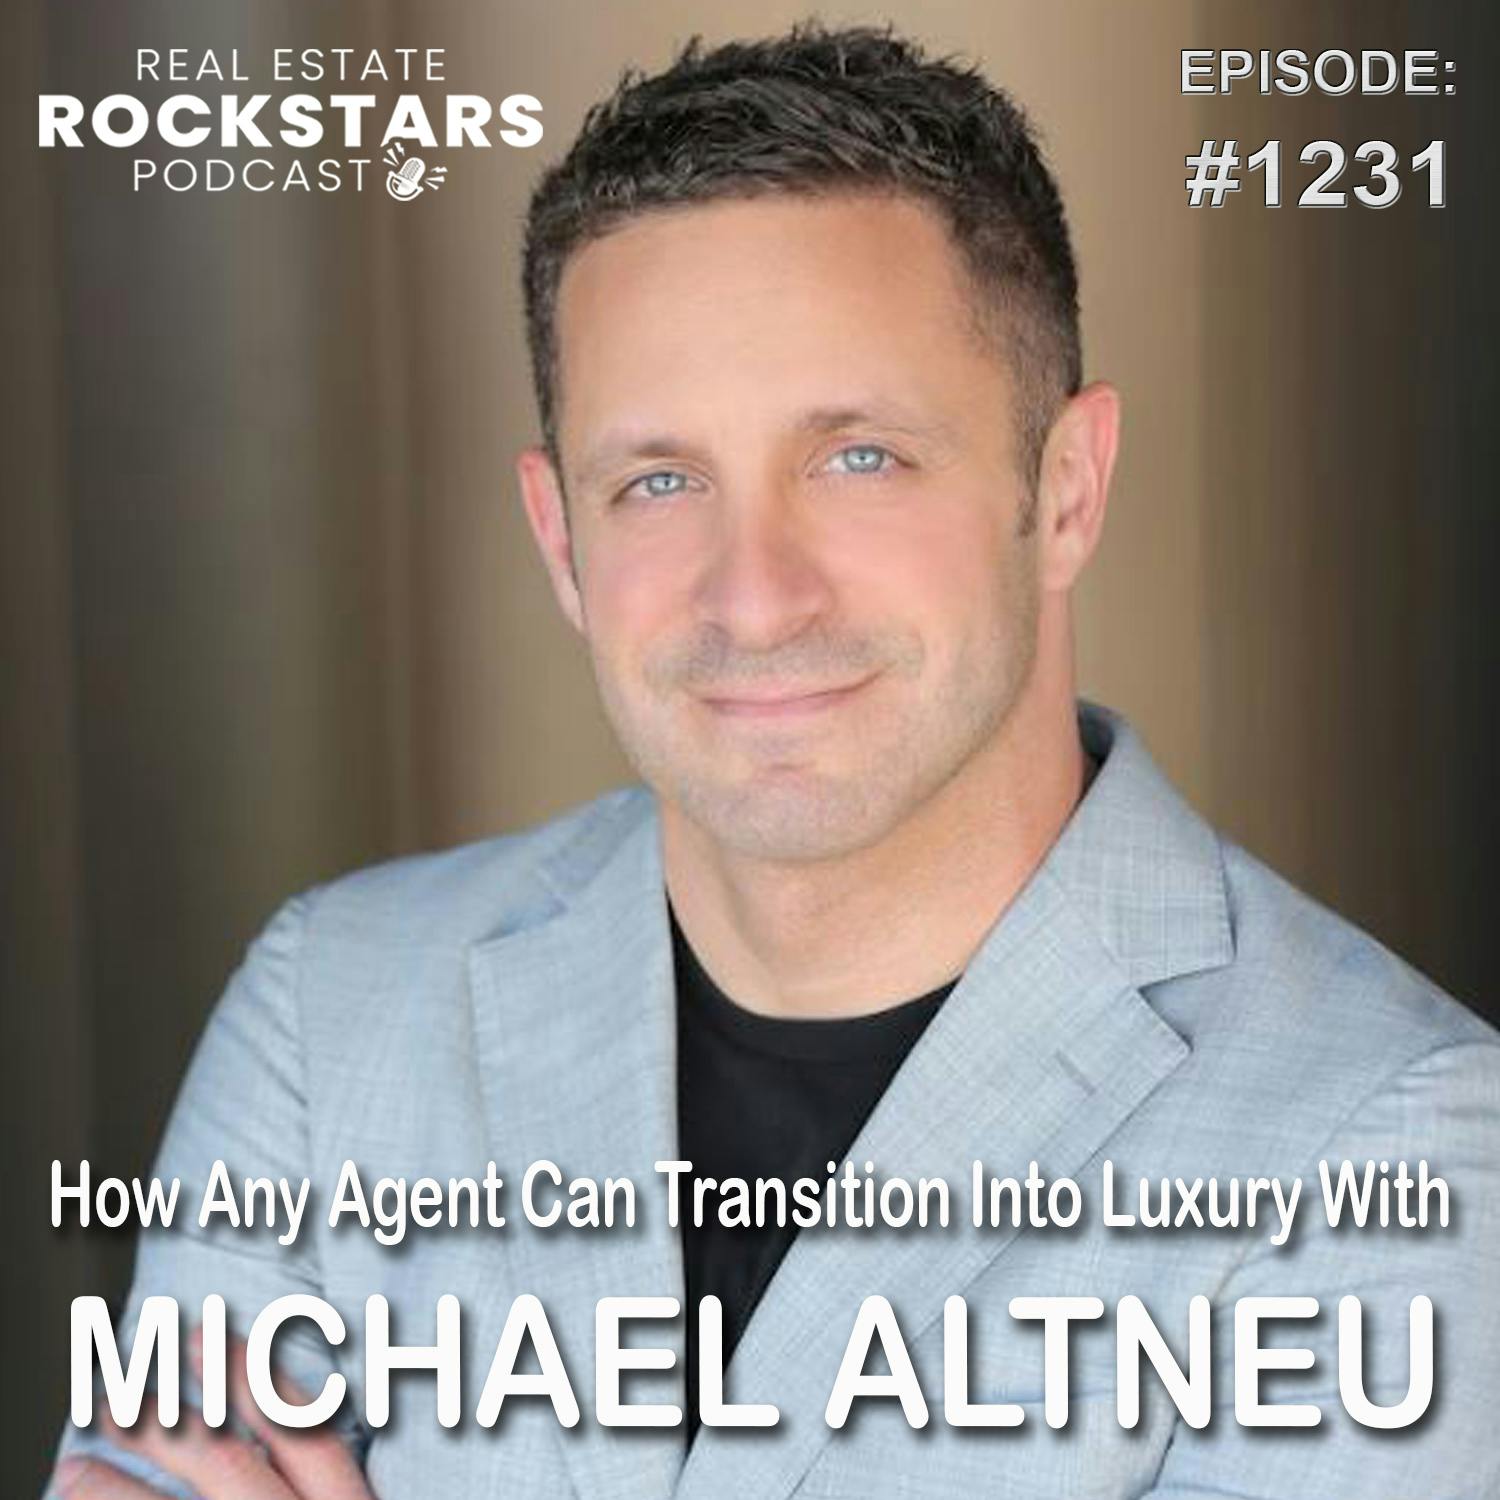 1231: How Any Agent Can Transition Into Luxury With Michael Altneu